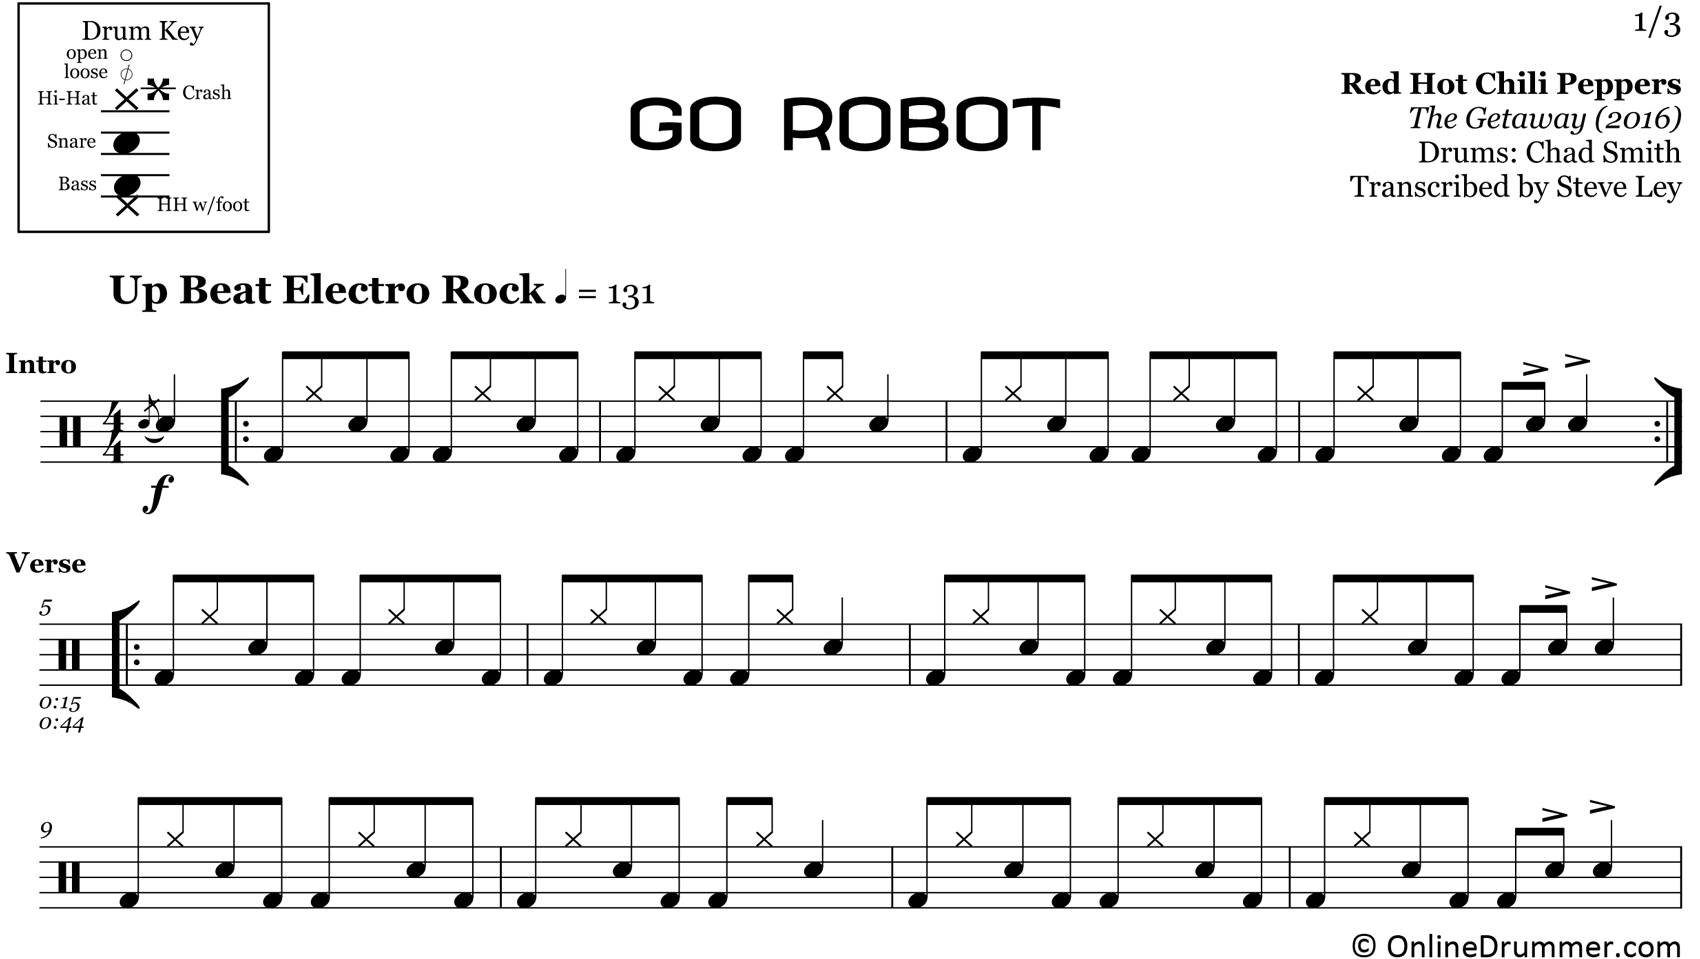 Go Robot - Red Hot Chili Peppers - Drum Sheet Music